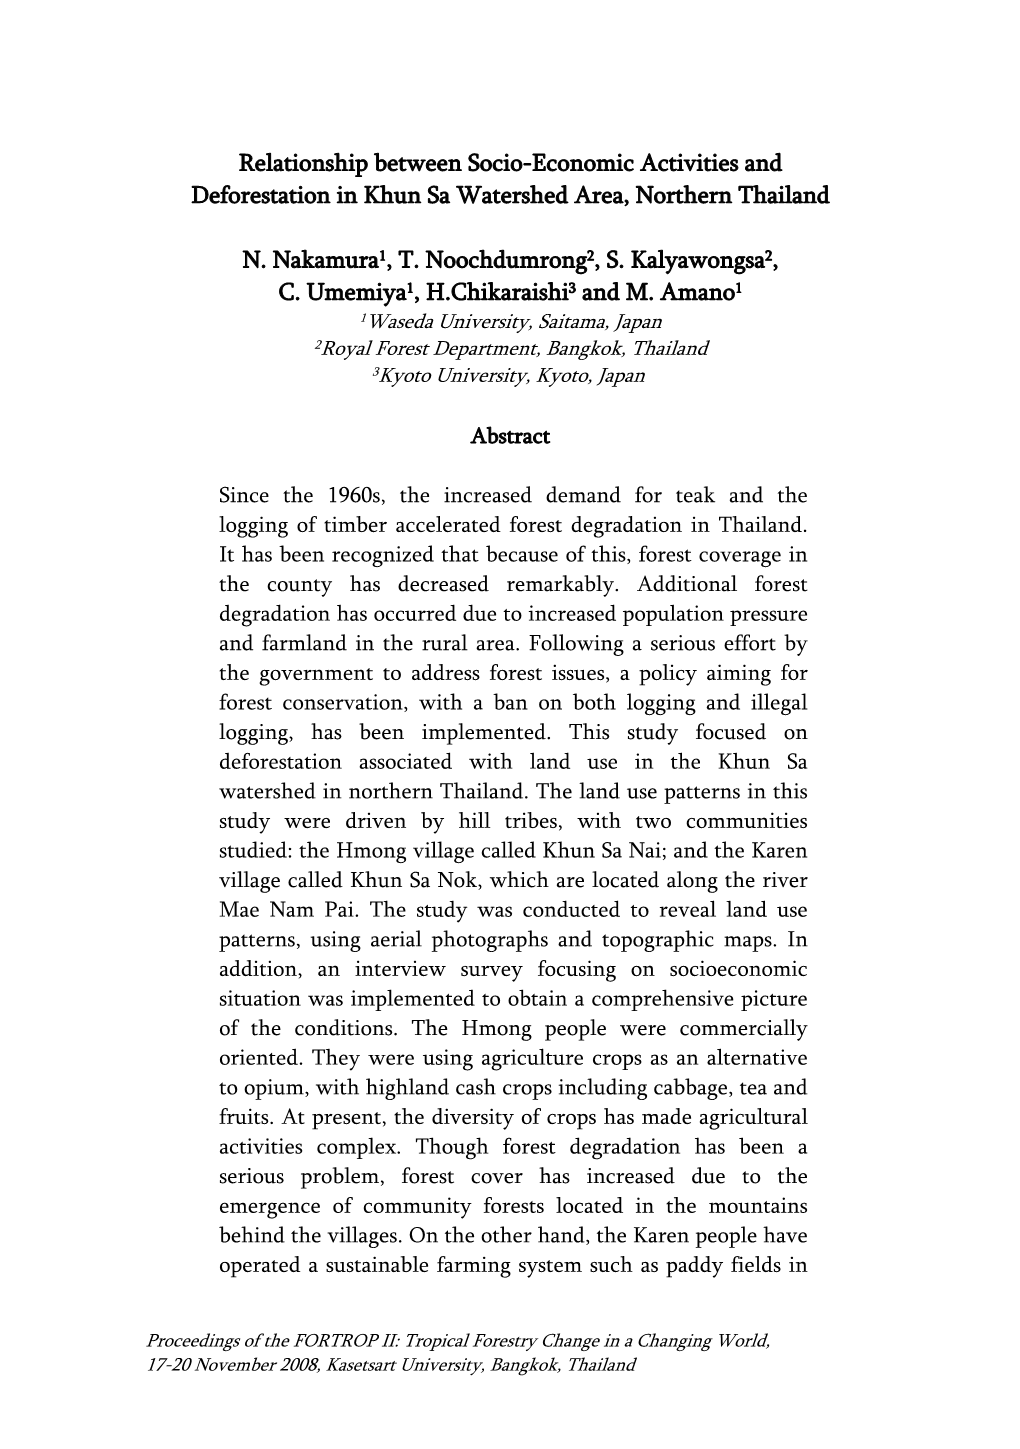 Relationship Between Socio-Economic Activities and Deforestation in Khun Sa Watershed Area, Northern Thailand